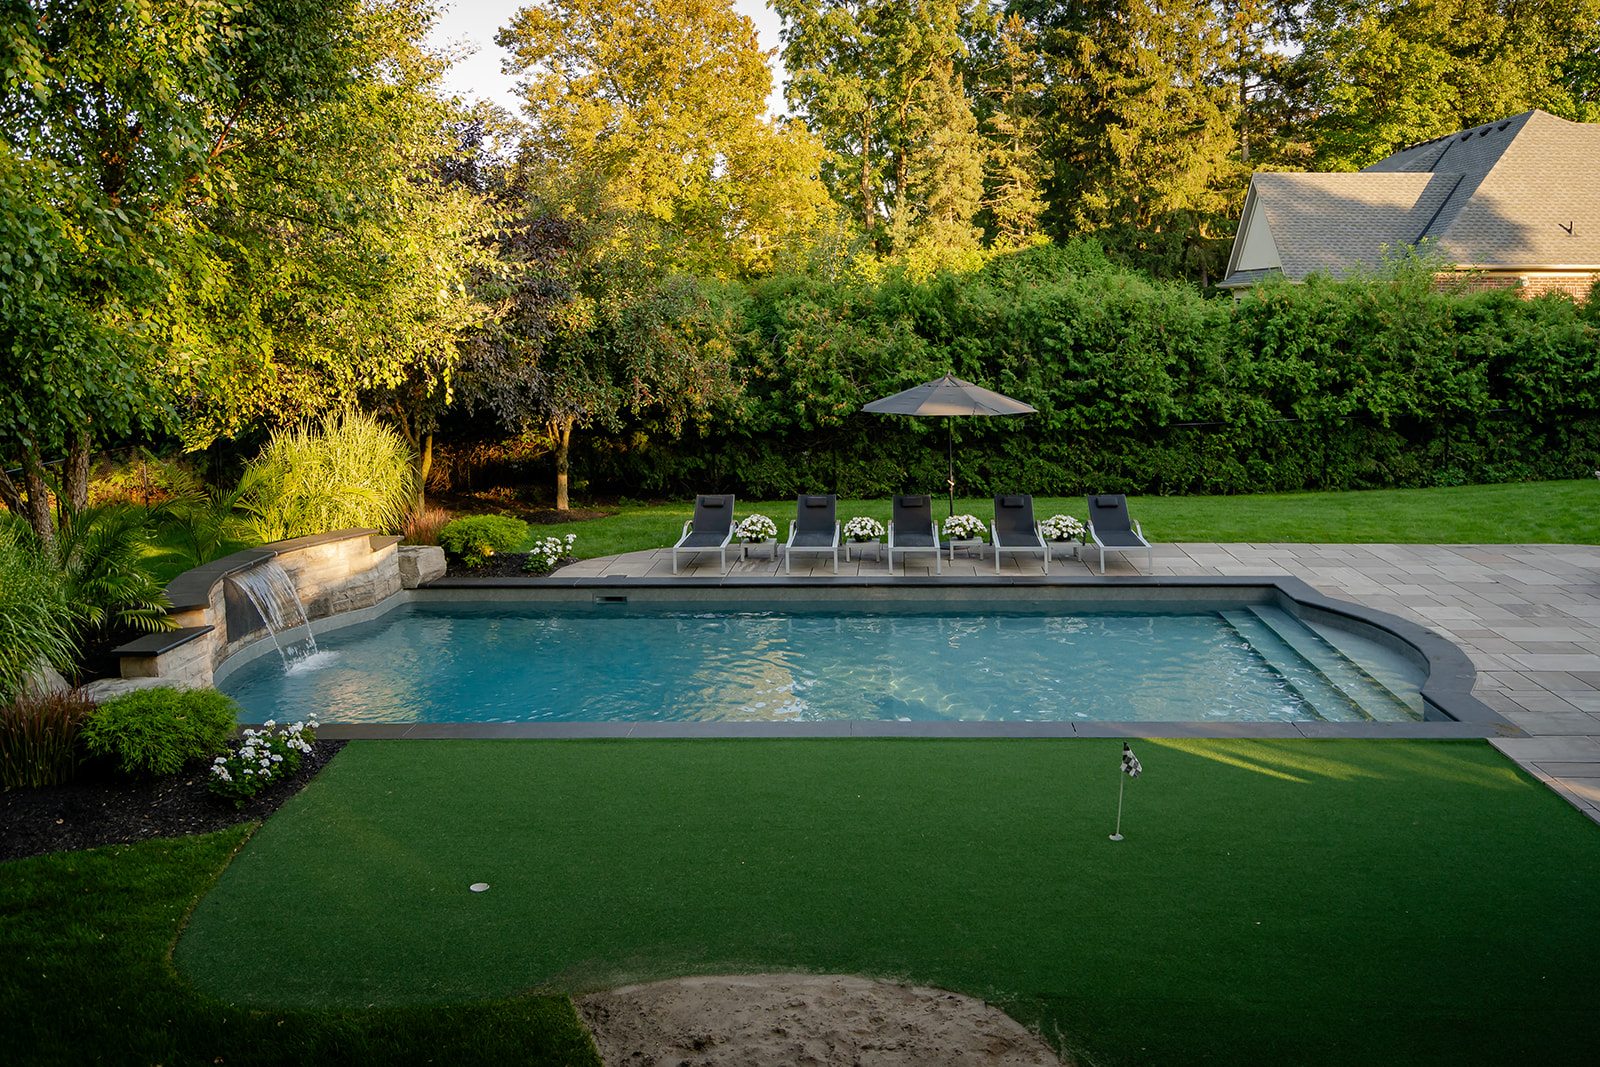 An inground pool with lawn chairs beside the pool.